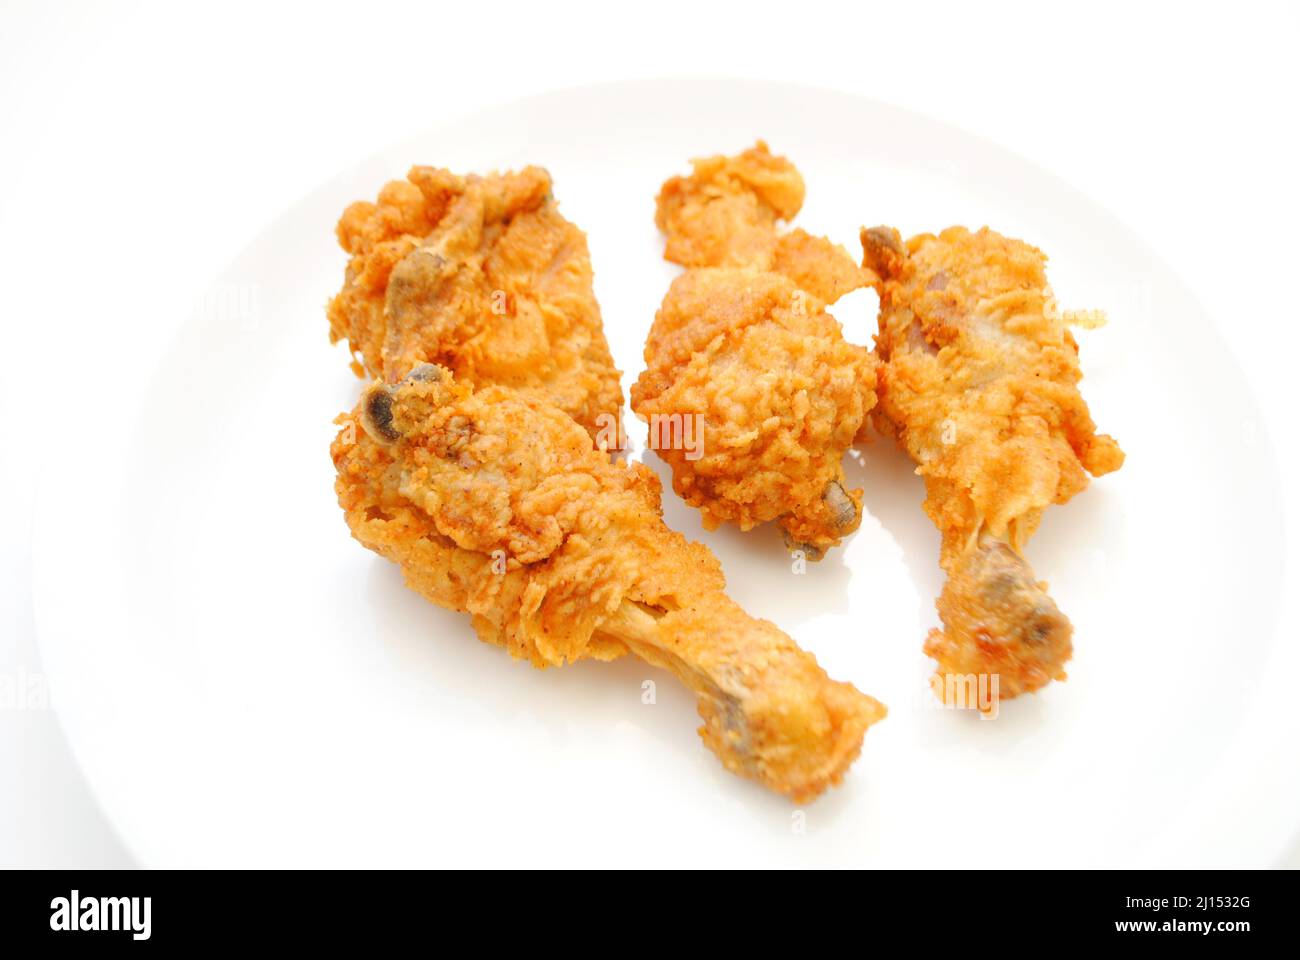 Hot and Spicy Chicken Pieces on a White Plate Stock Photo